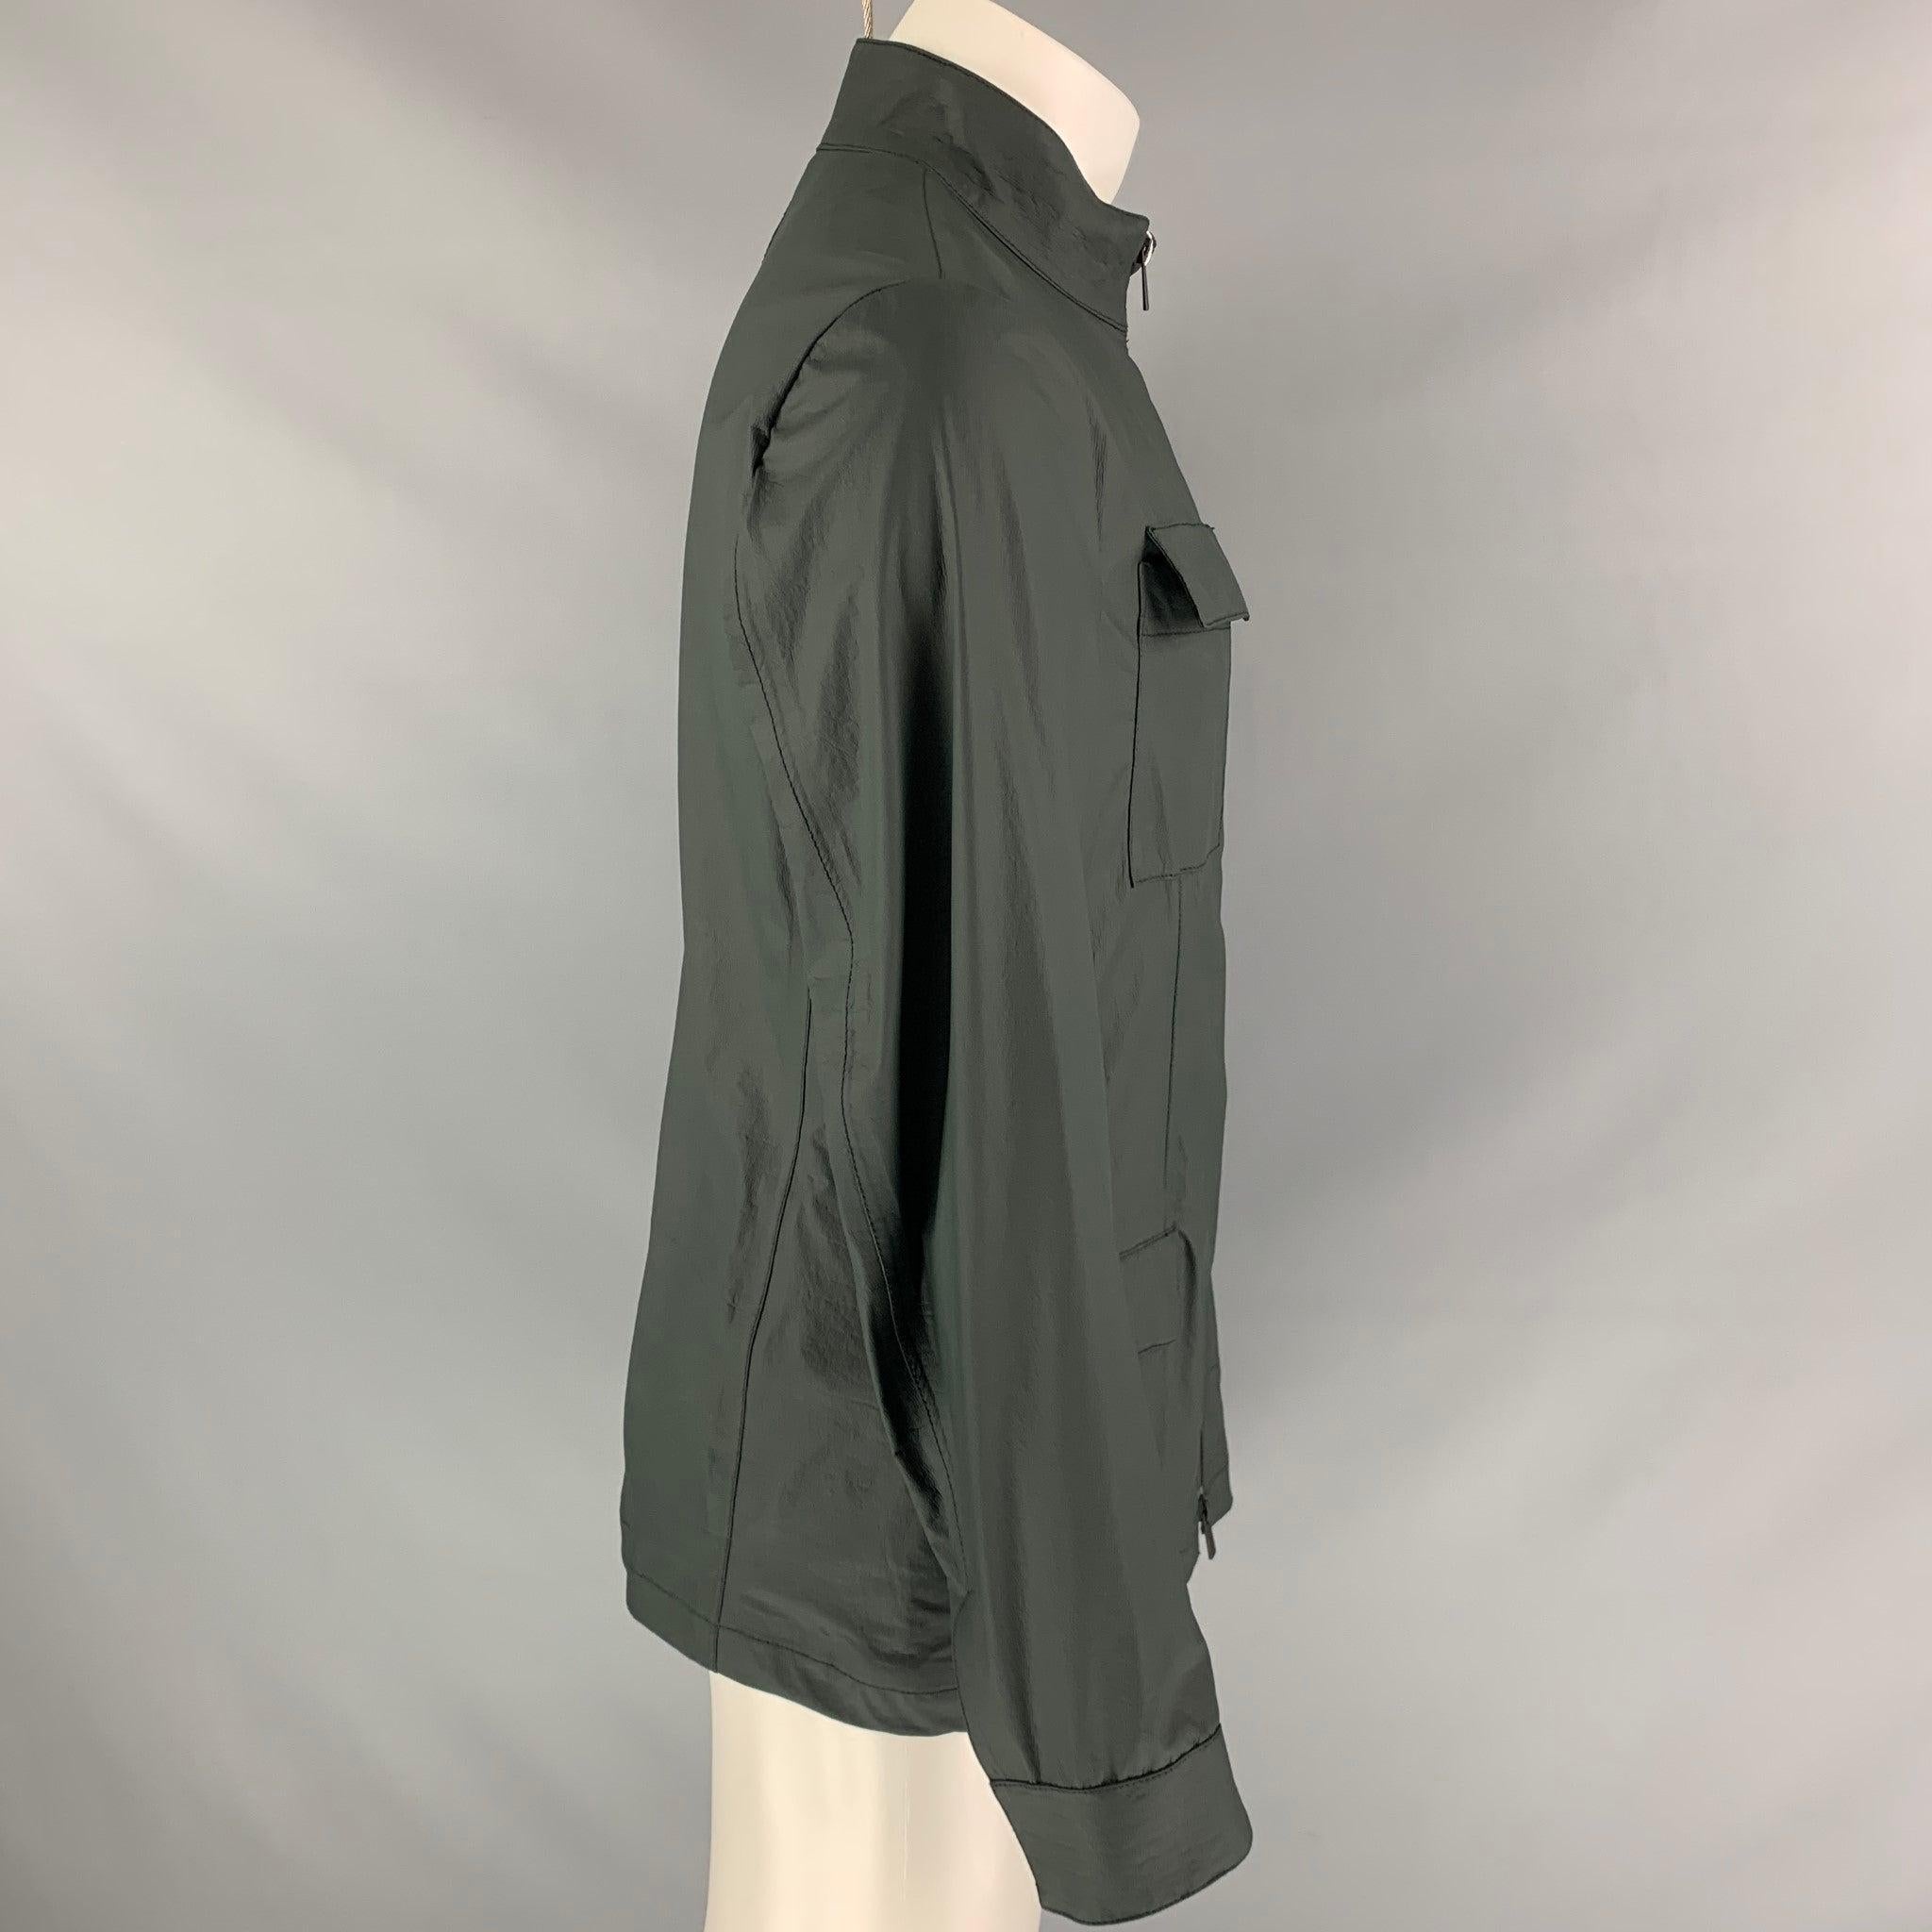 ARMANI COLLEZIONI Size 38 Dark Green Polyethylene Zip Up Water Repellent Jacket In Excellent Condition For Sale In San Francisco, CA